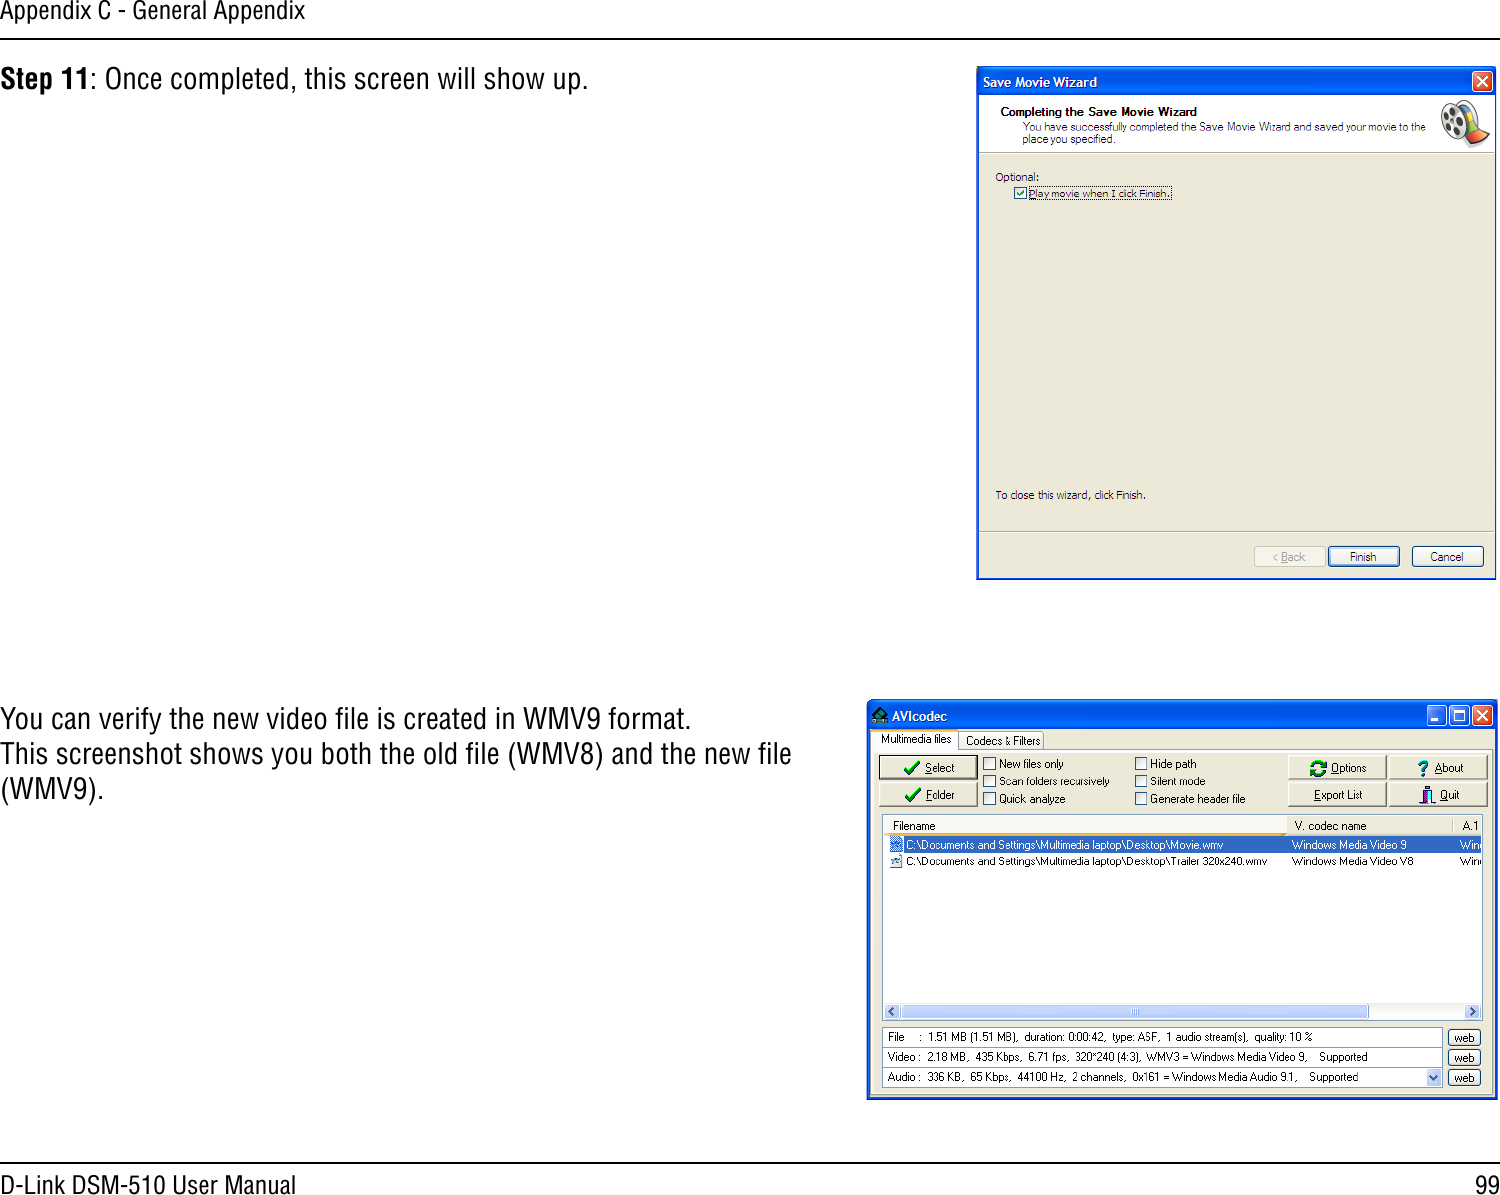 99D-Link DSM-510 User ManualAppendix C - General AppendixStep 11: Once completed, this screen will show up.You can verify the new video ﬁle is created in WMV9 format.  This screenshot shows you both the old ﬁle (WMV8) and the new ﬁle (WMV9). 